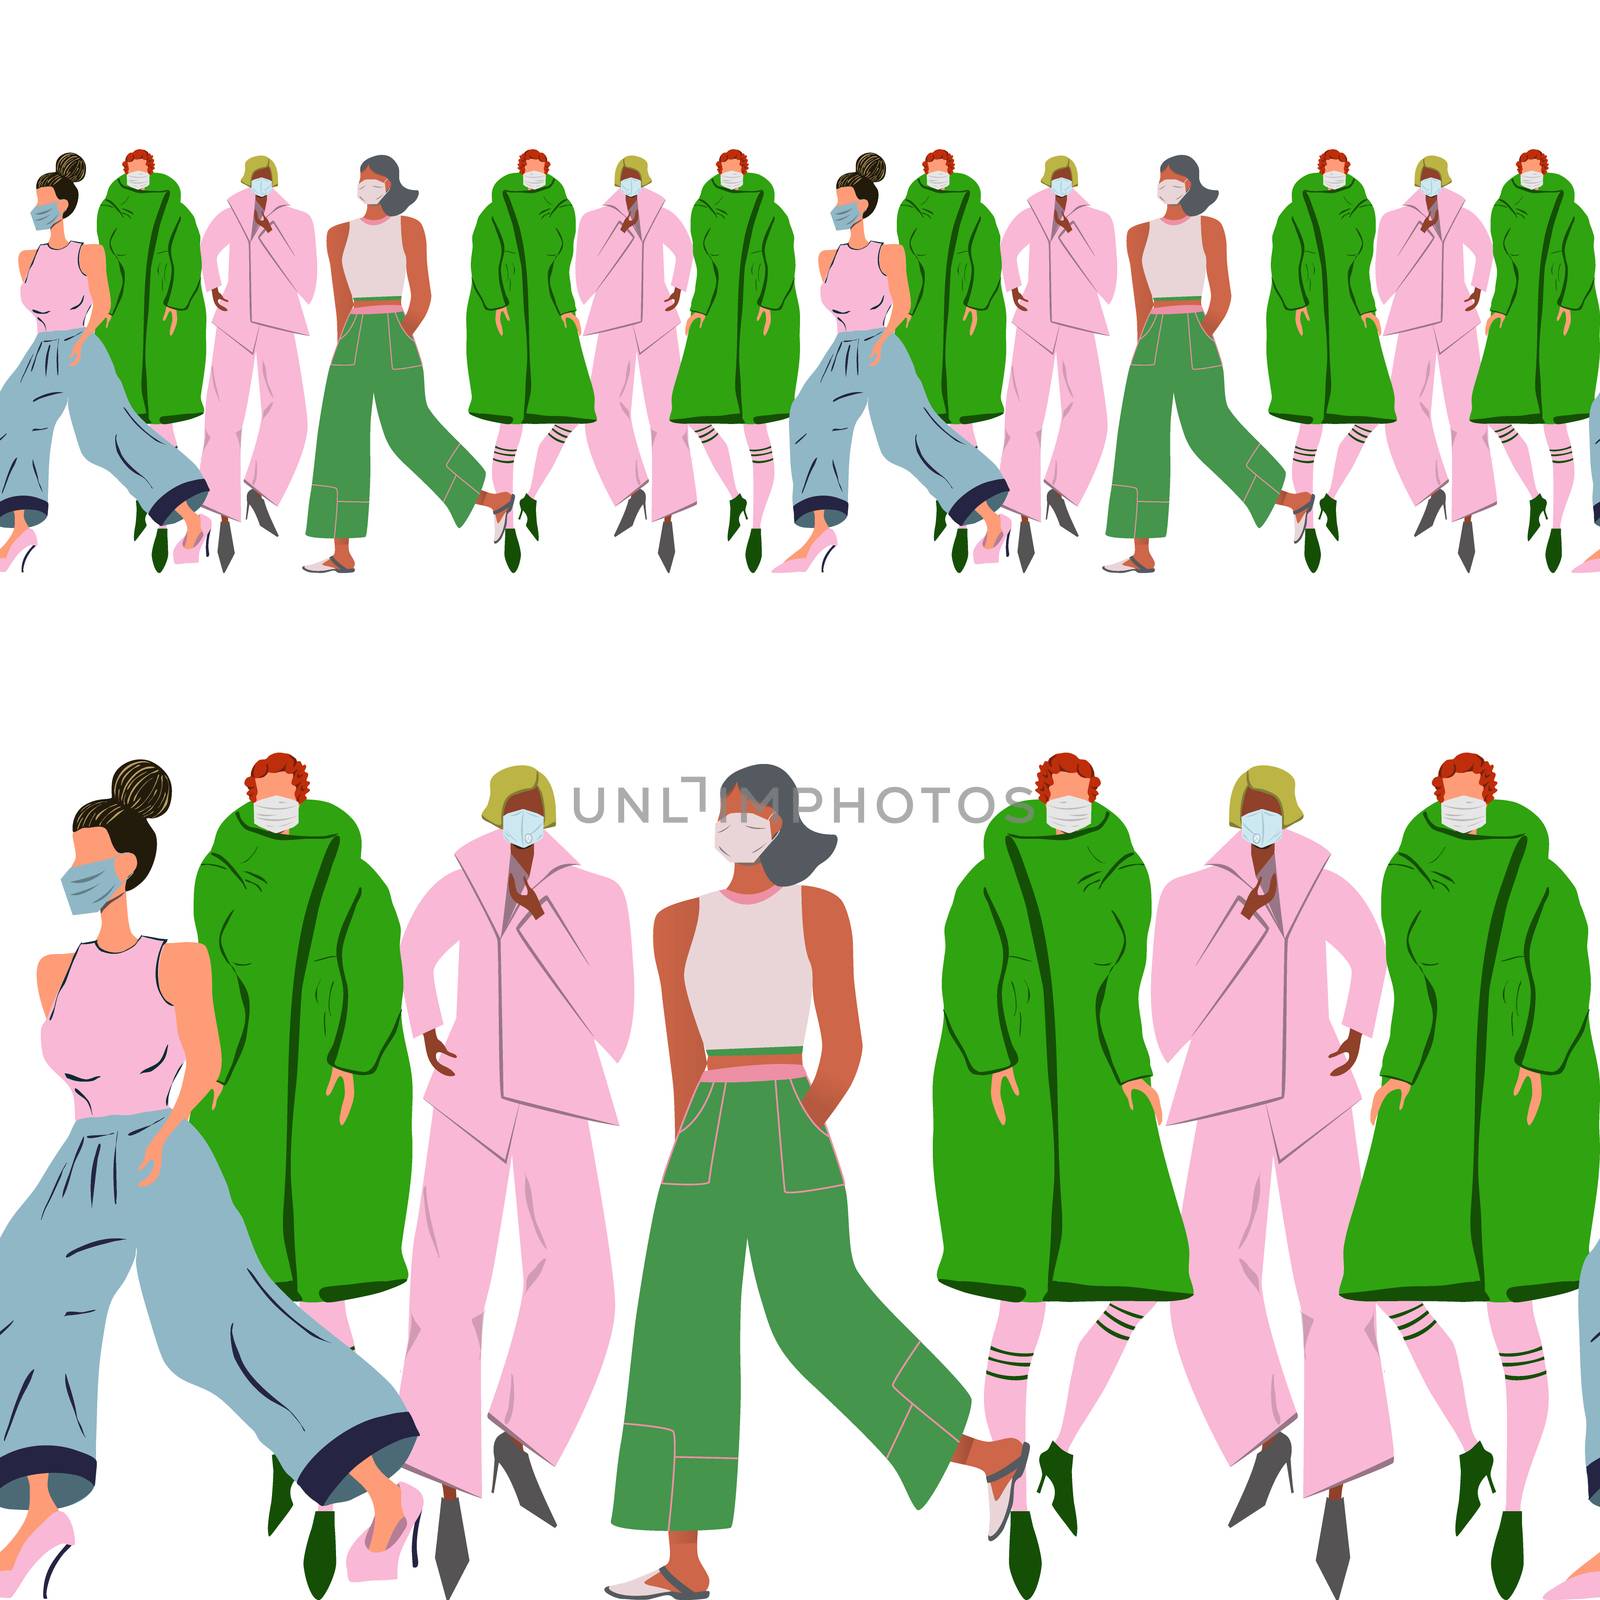 Green and pink endless border with women wearing protective face mask. Latest trend news, fashion bloggers post. Flat cartoon illustration with copyspace on white background. Vector illustration.